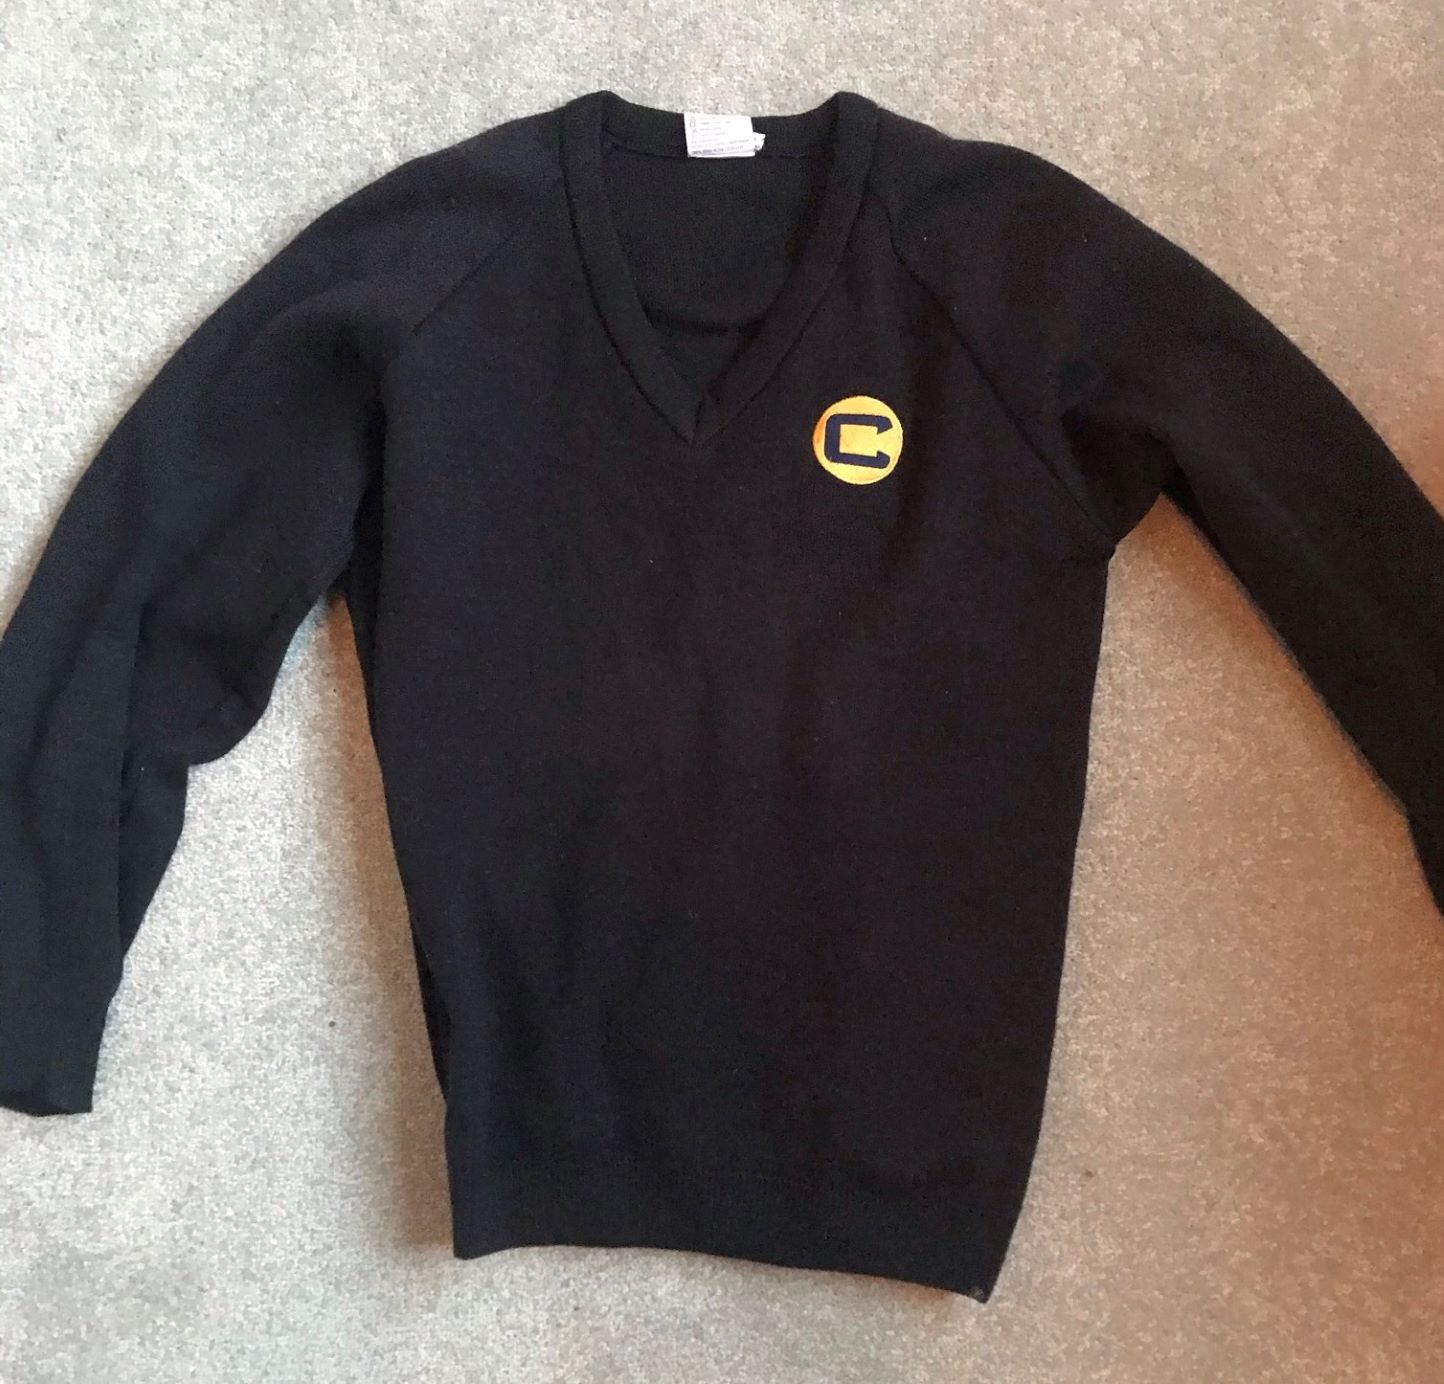 Charter North Jumper: Size 30 Emergency jumper (not great condition but stops you getting detention)